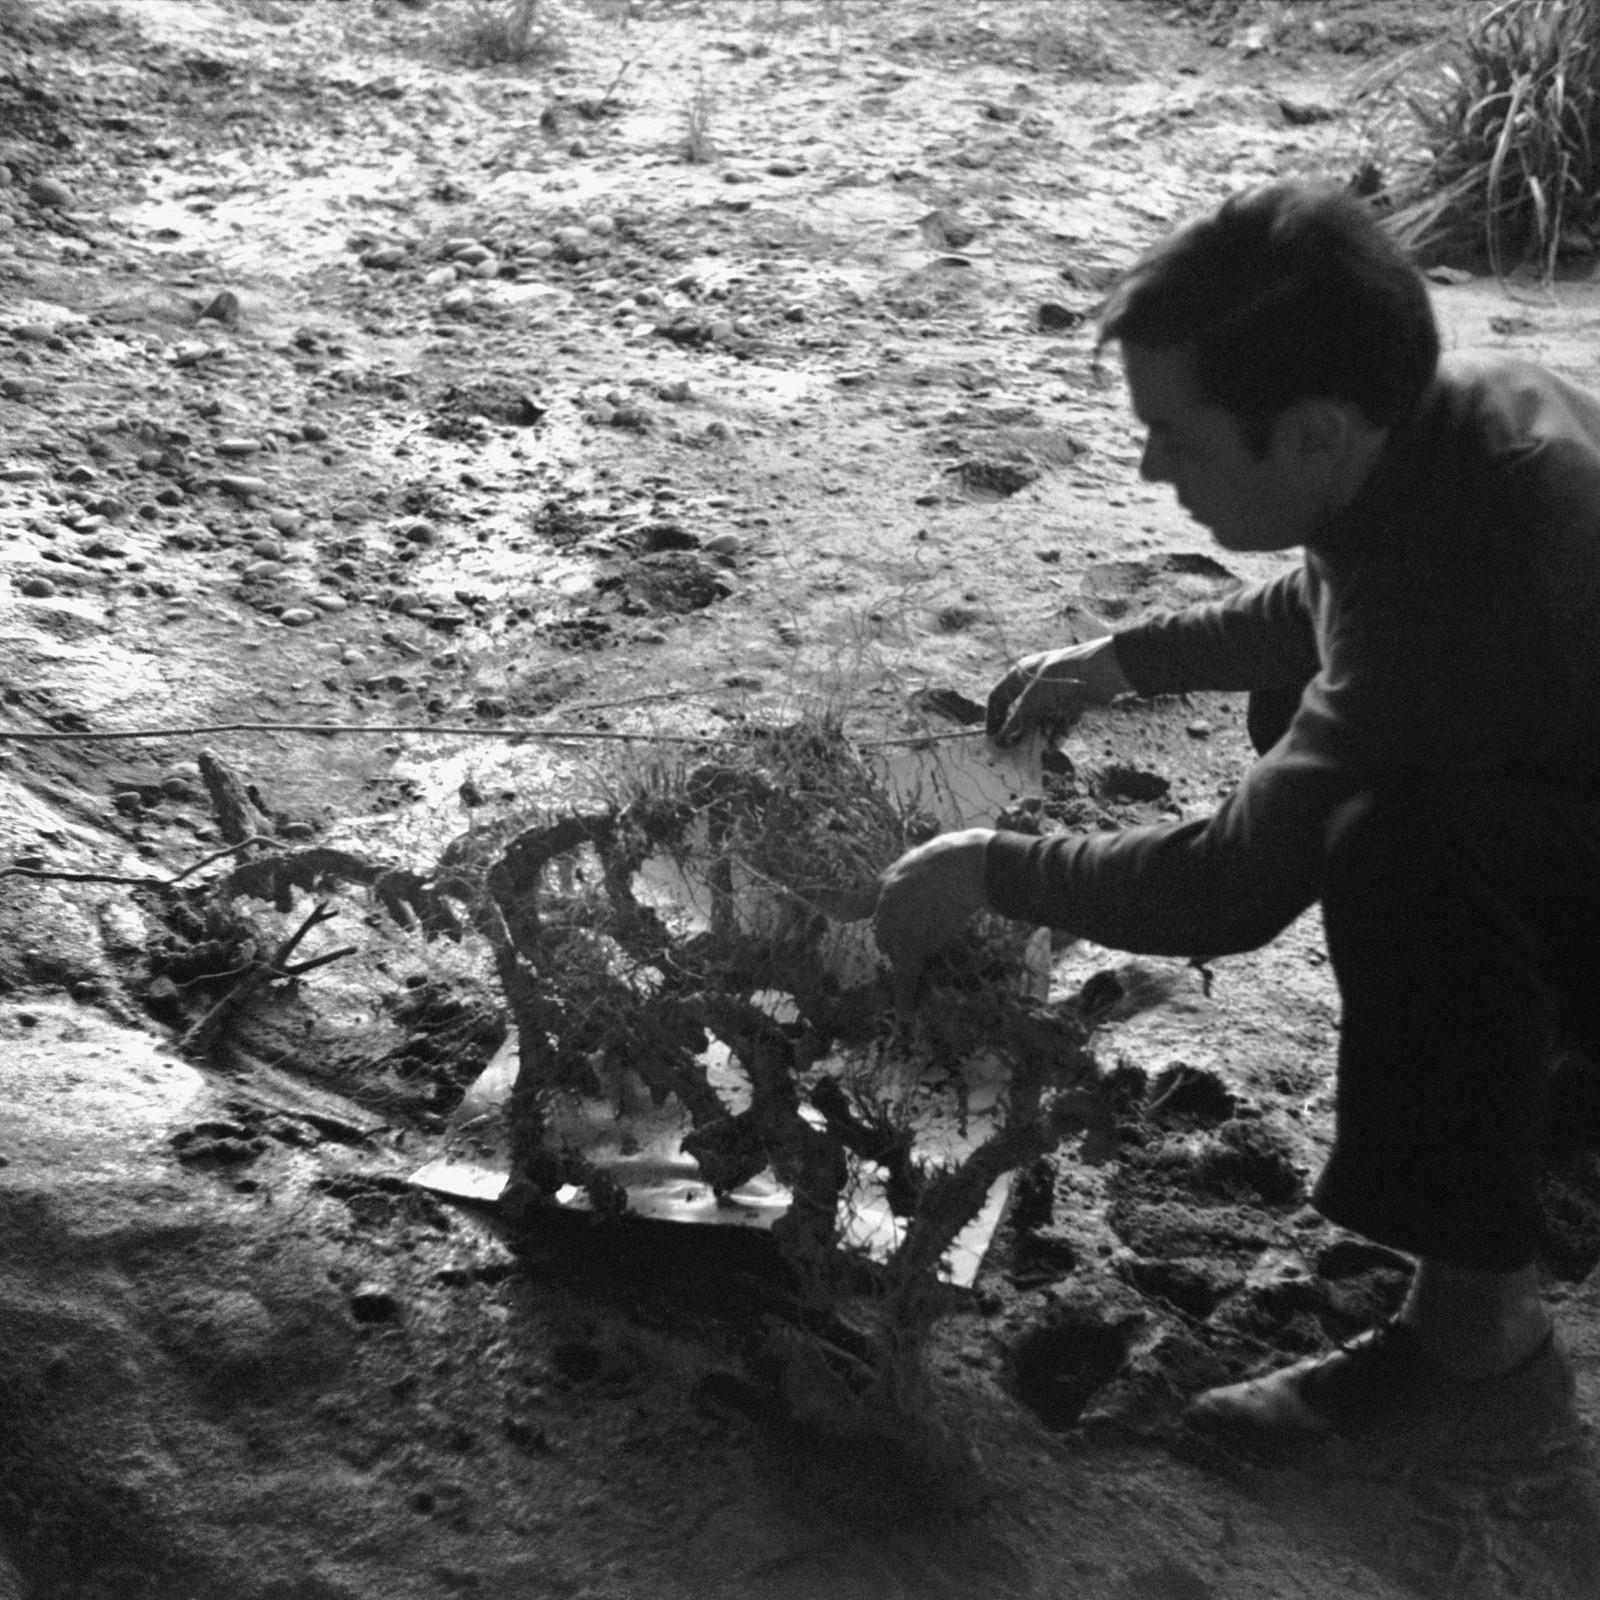 Yves Klein creating a Cosmogony on the banks of the Loup River